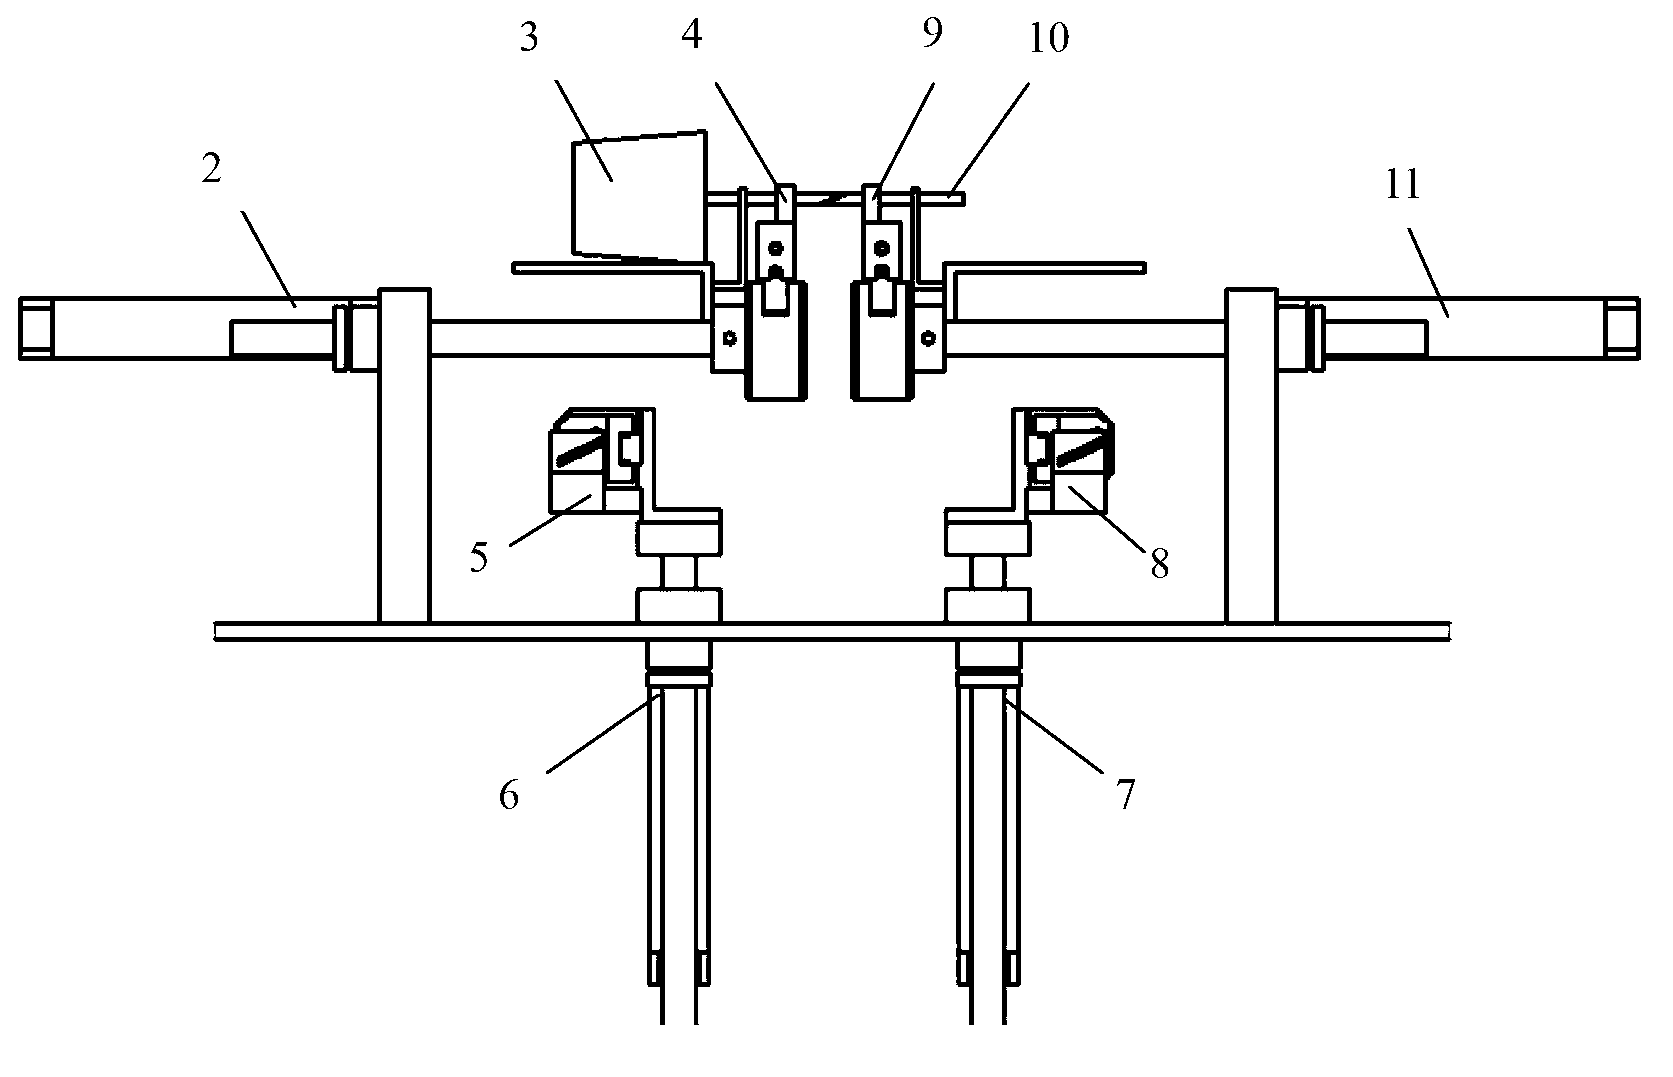 Seedling production device